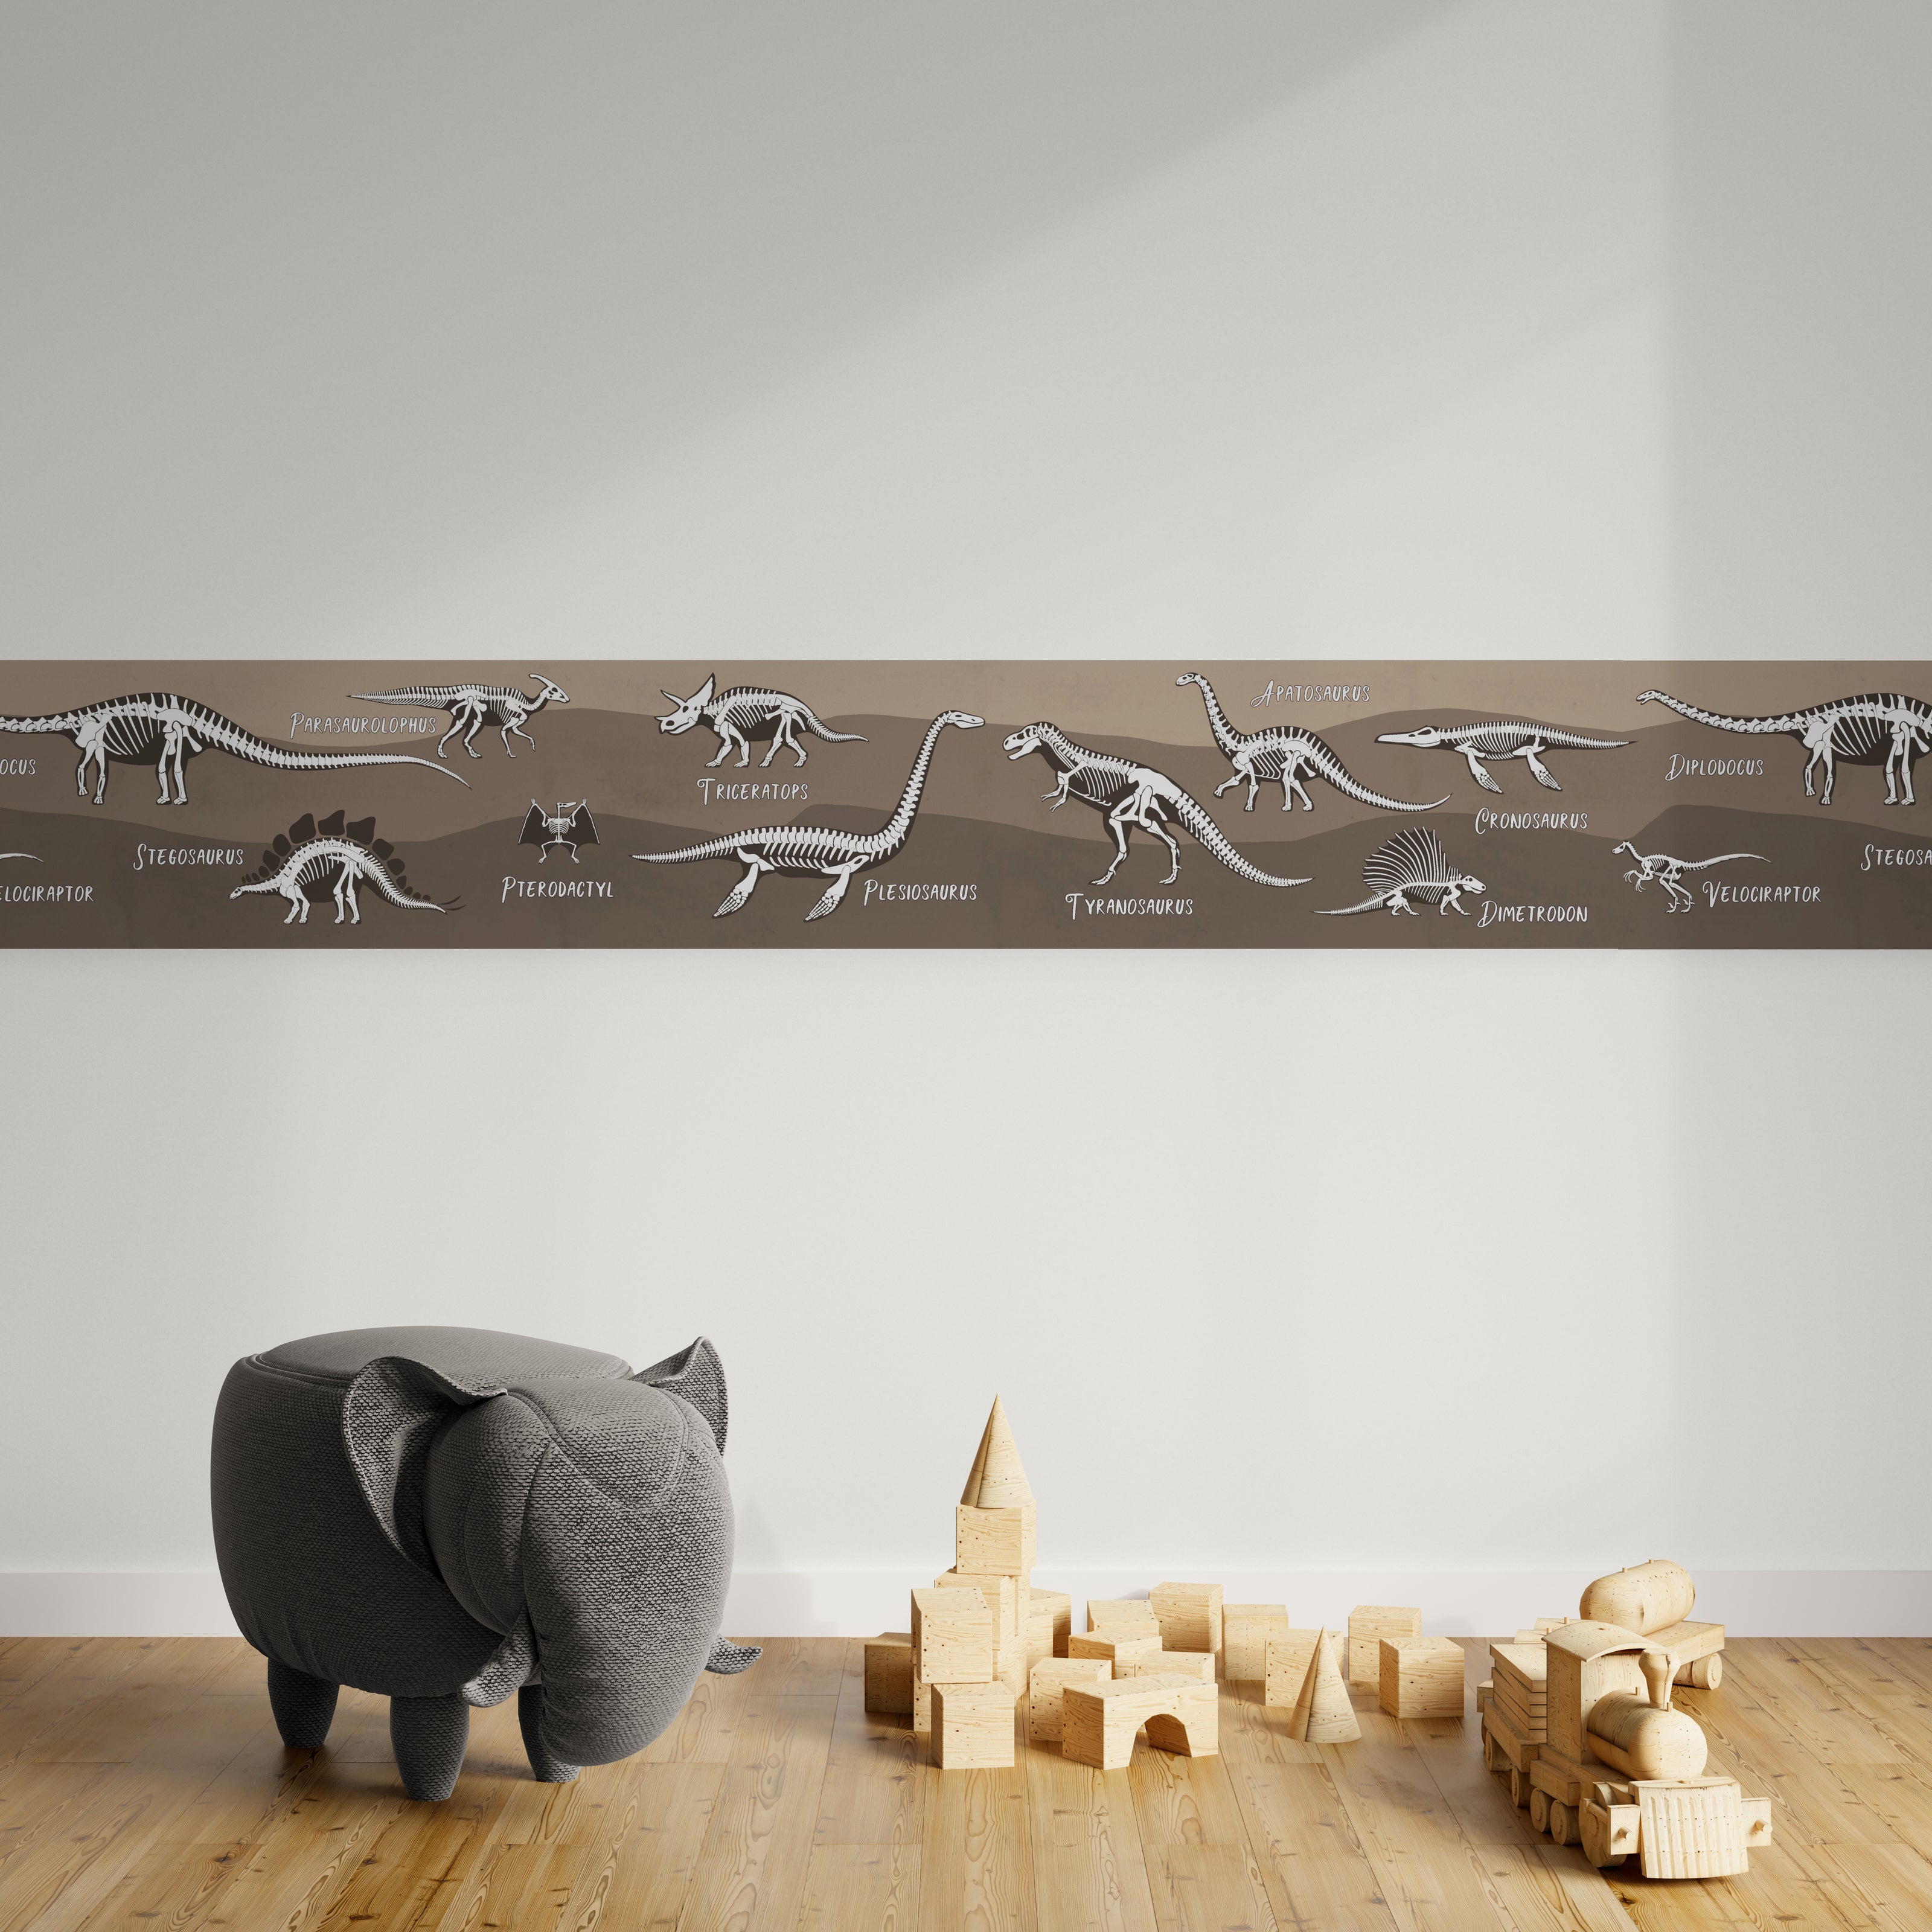 GB90240g8 Grace & Gardenia X-Ray Dinosaurs Peel and Stick Wallpaper Border 8in Height x 18ft Long, Brown Black White